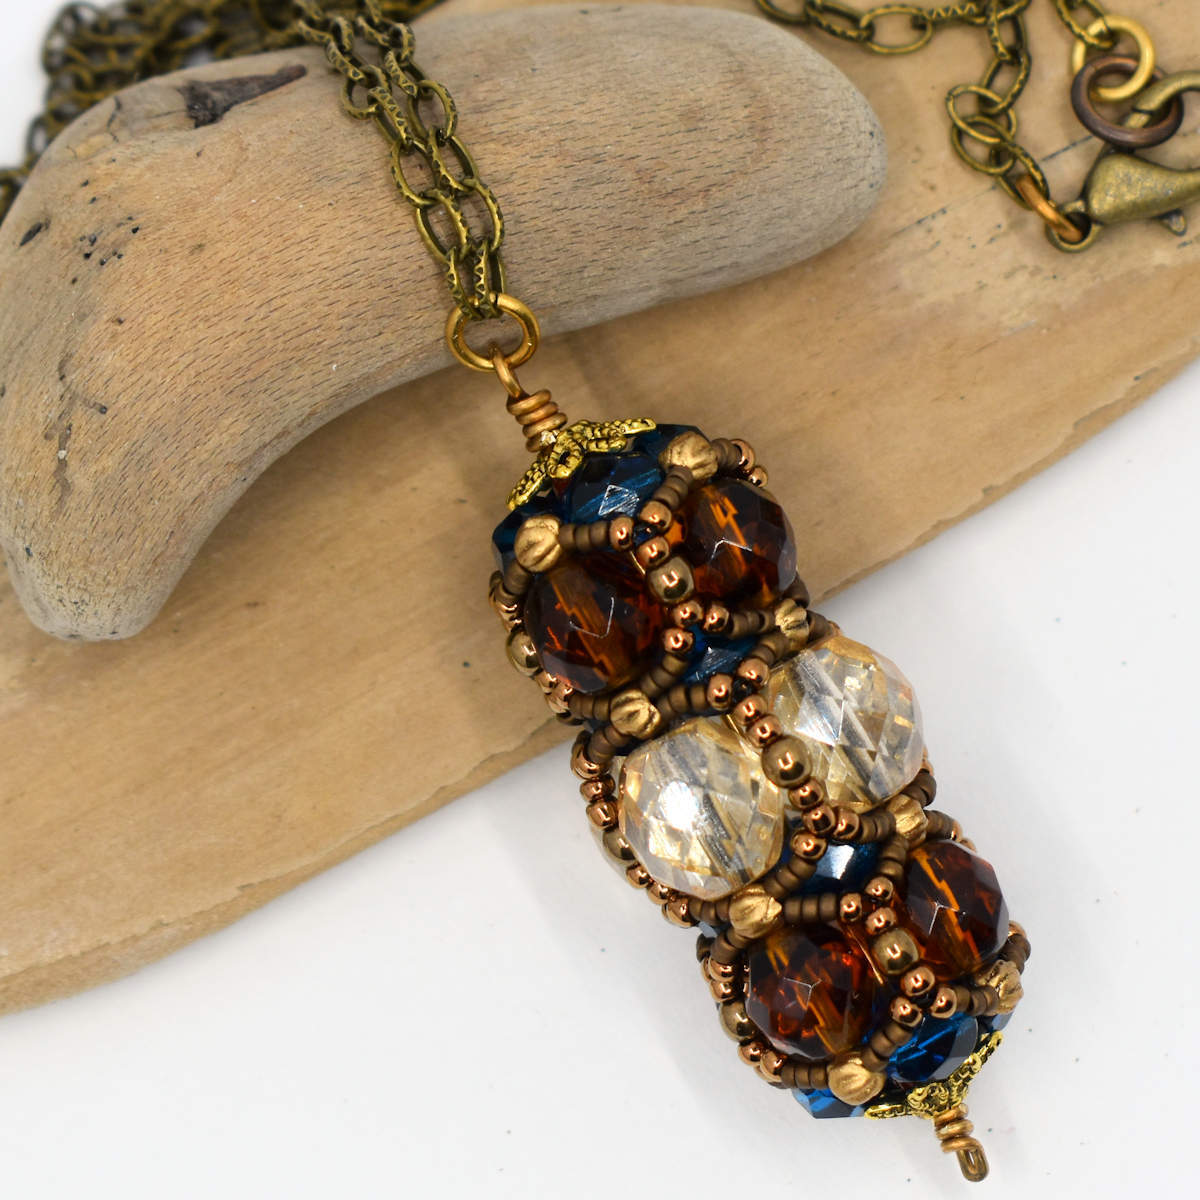 A columnar brown and clear beaded pendant is draped against smooth driftwood. The pendant has a center row of slightly yellowy clear faceted beads and the two outer layers are variegated dark amber.  Through the overlay of matte and shiny gold bead netting, dark capri blue beads are just visible at the top and bottom of the pendant. 